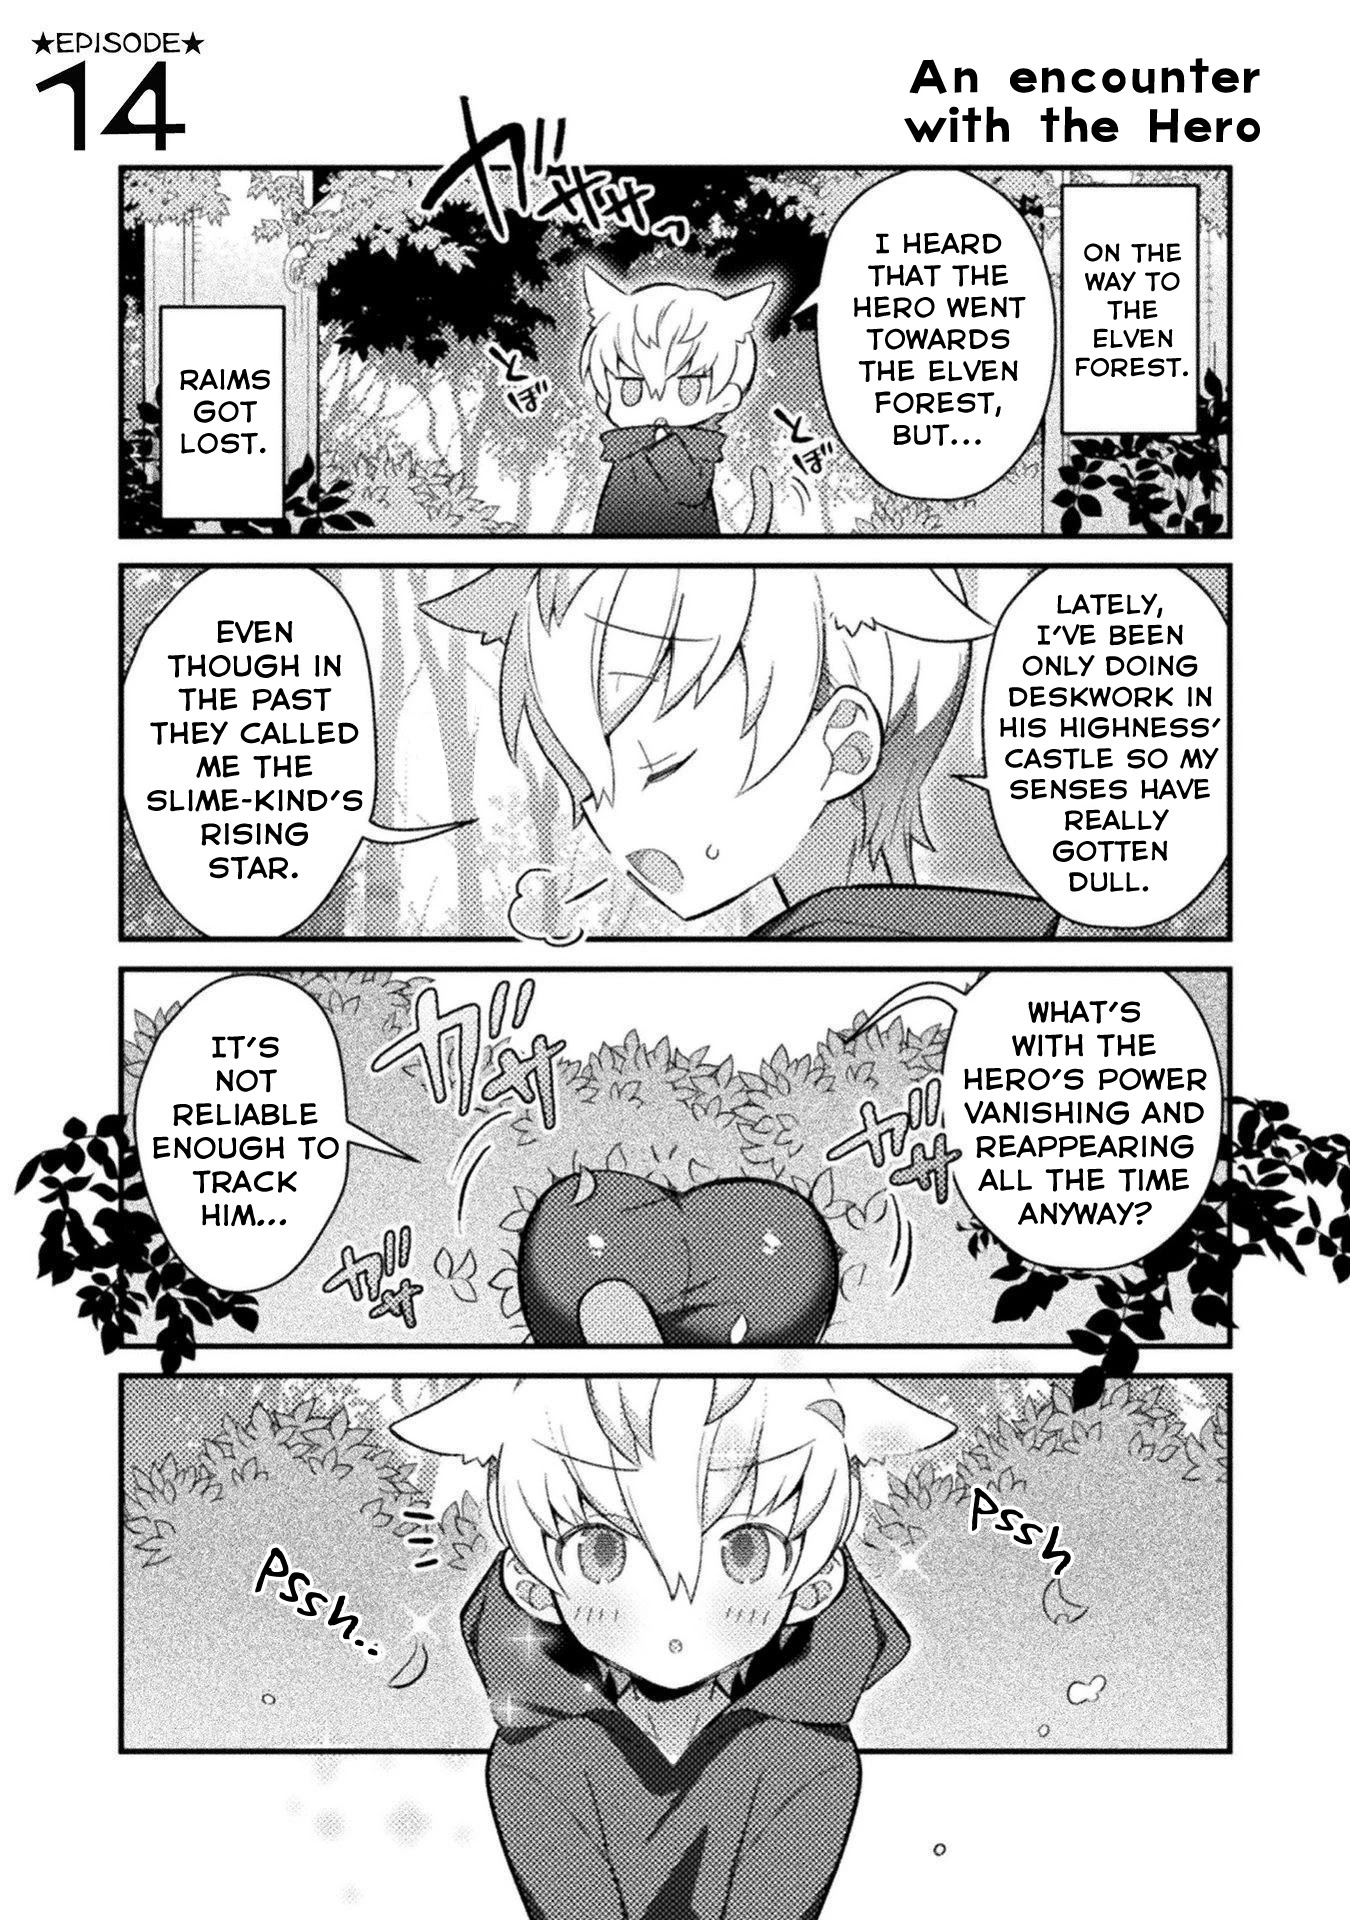 After Reincarnation, My Party Was Full Of Traps, But I'm Not A Shotacon! - 14 page 2